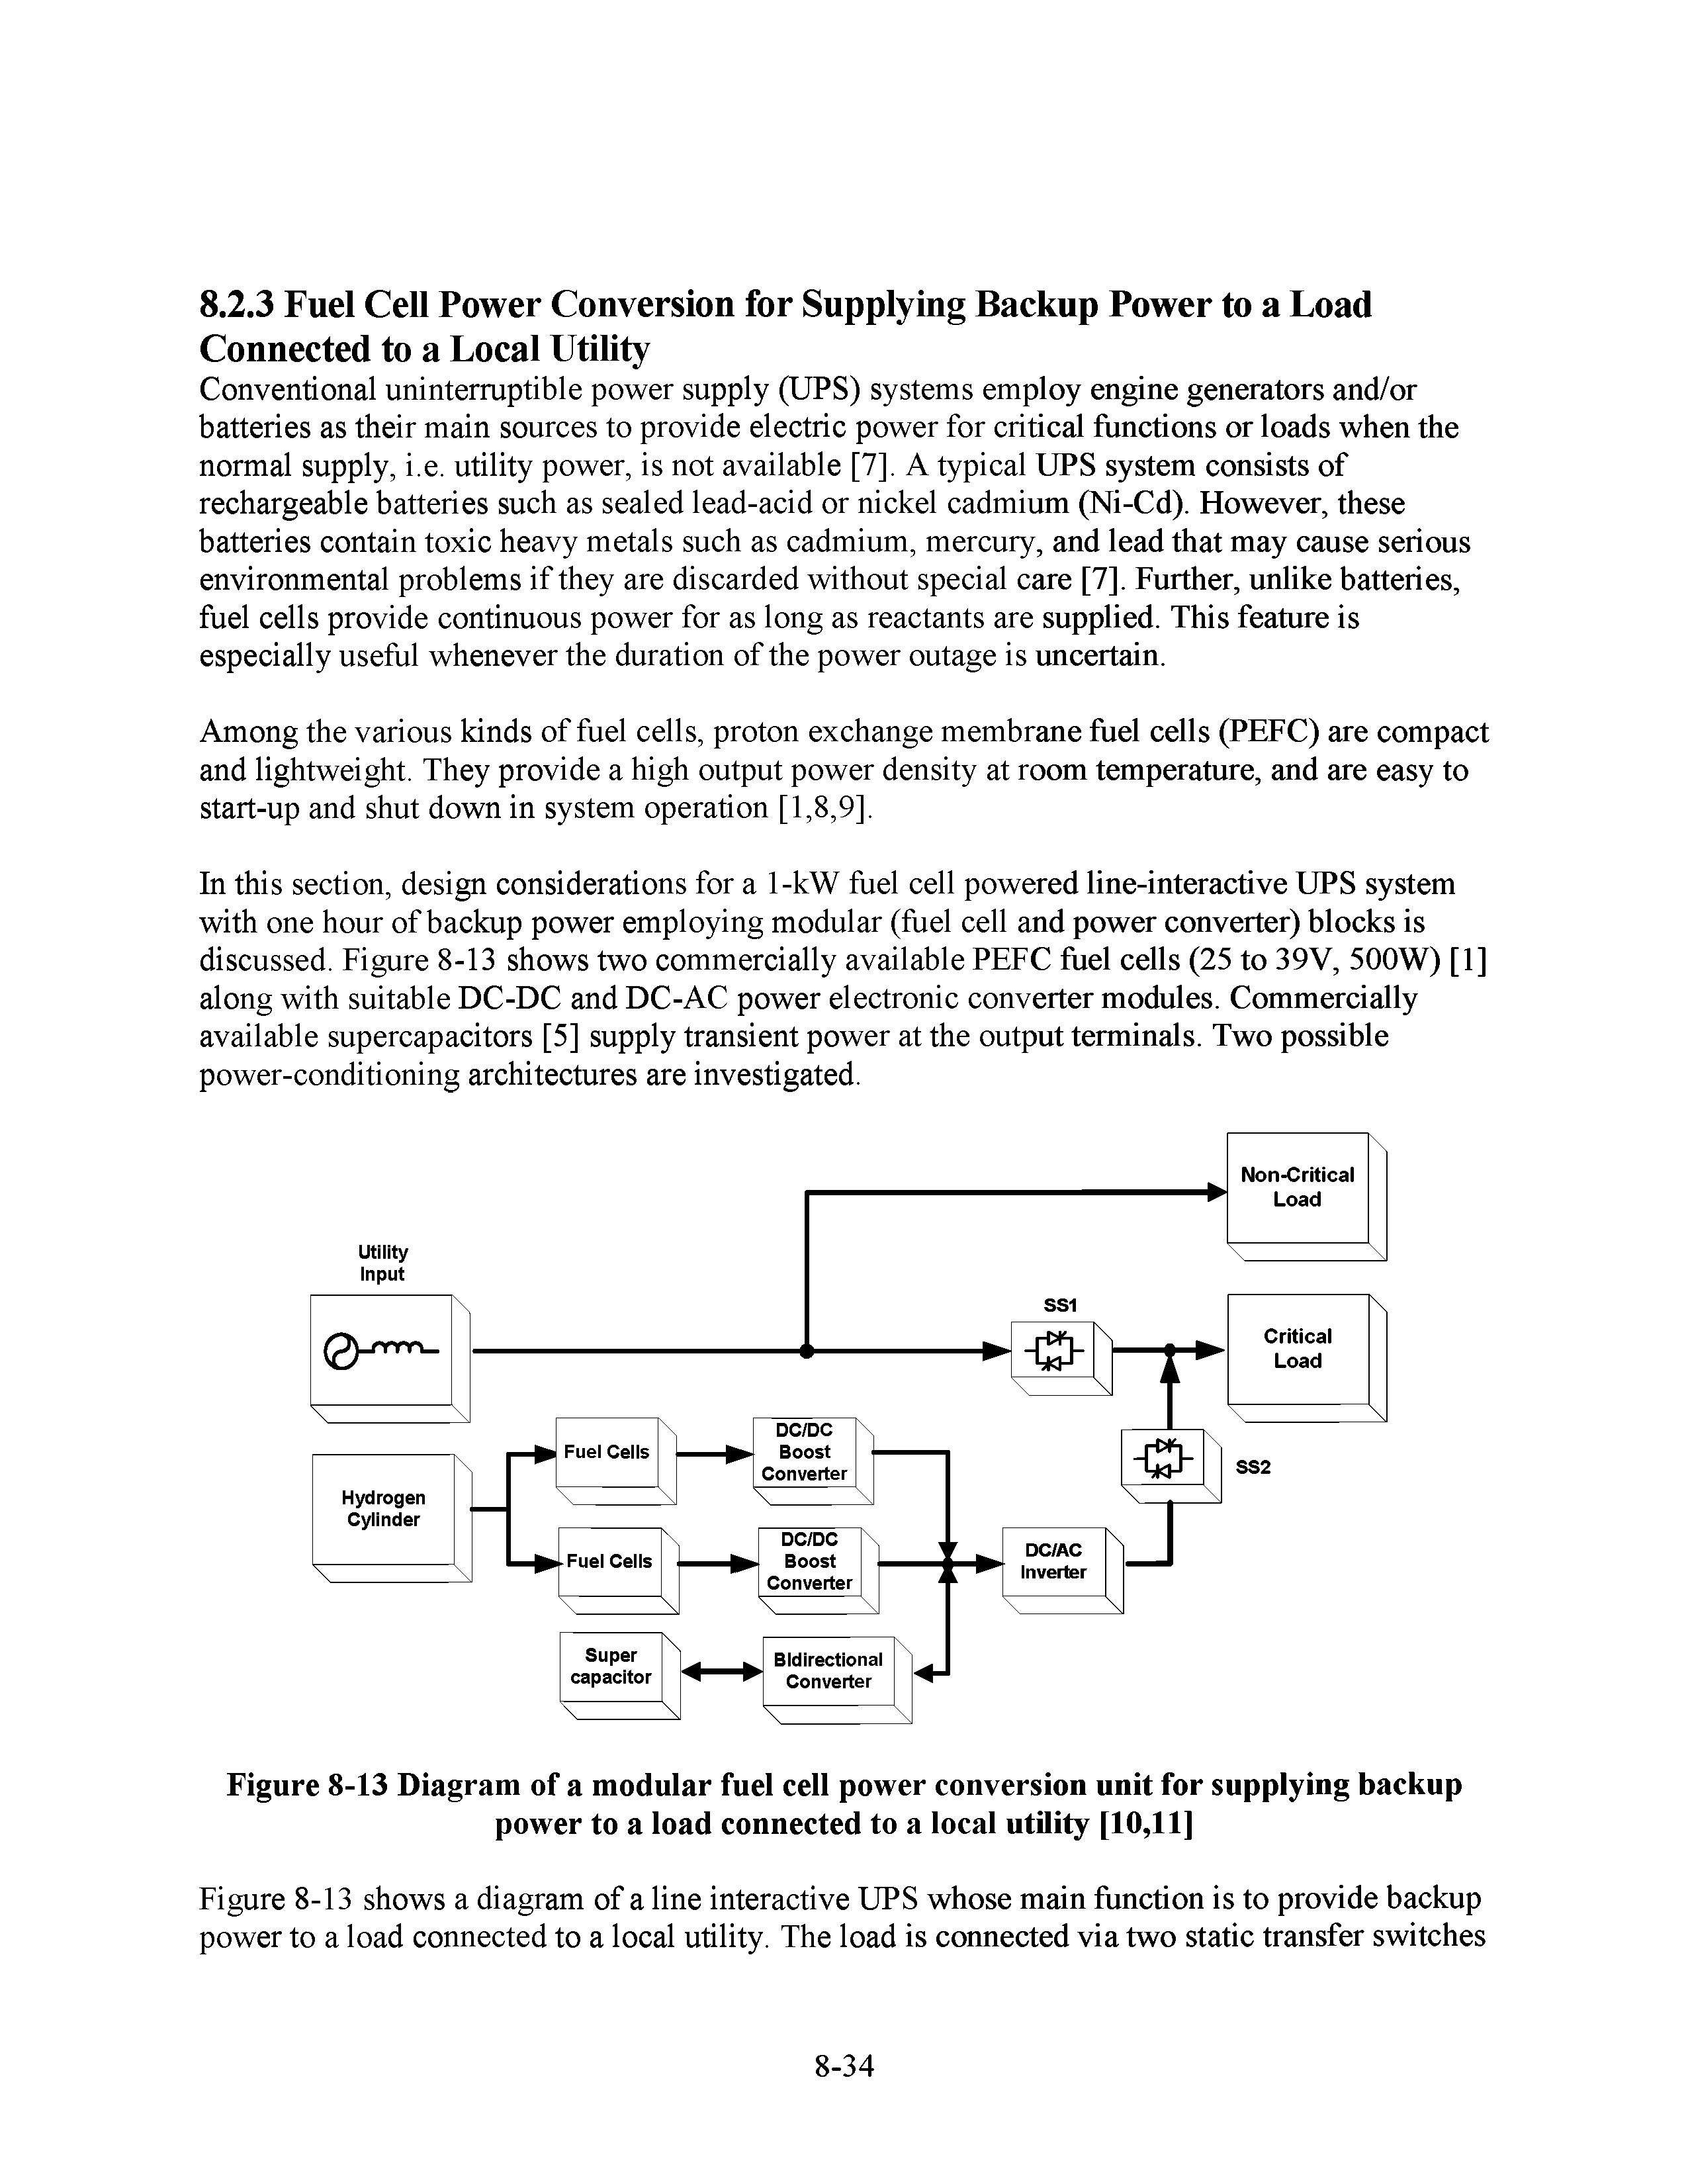 Figure 8-13 Diagram of a modular fuel cell power conversion unit for supplying backup power to a load connected to a local utflity [10,11]...